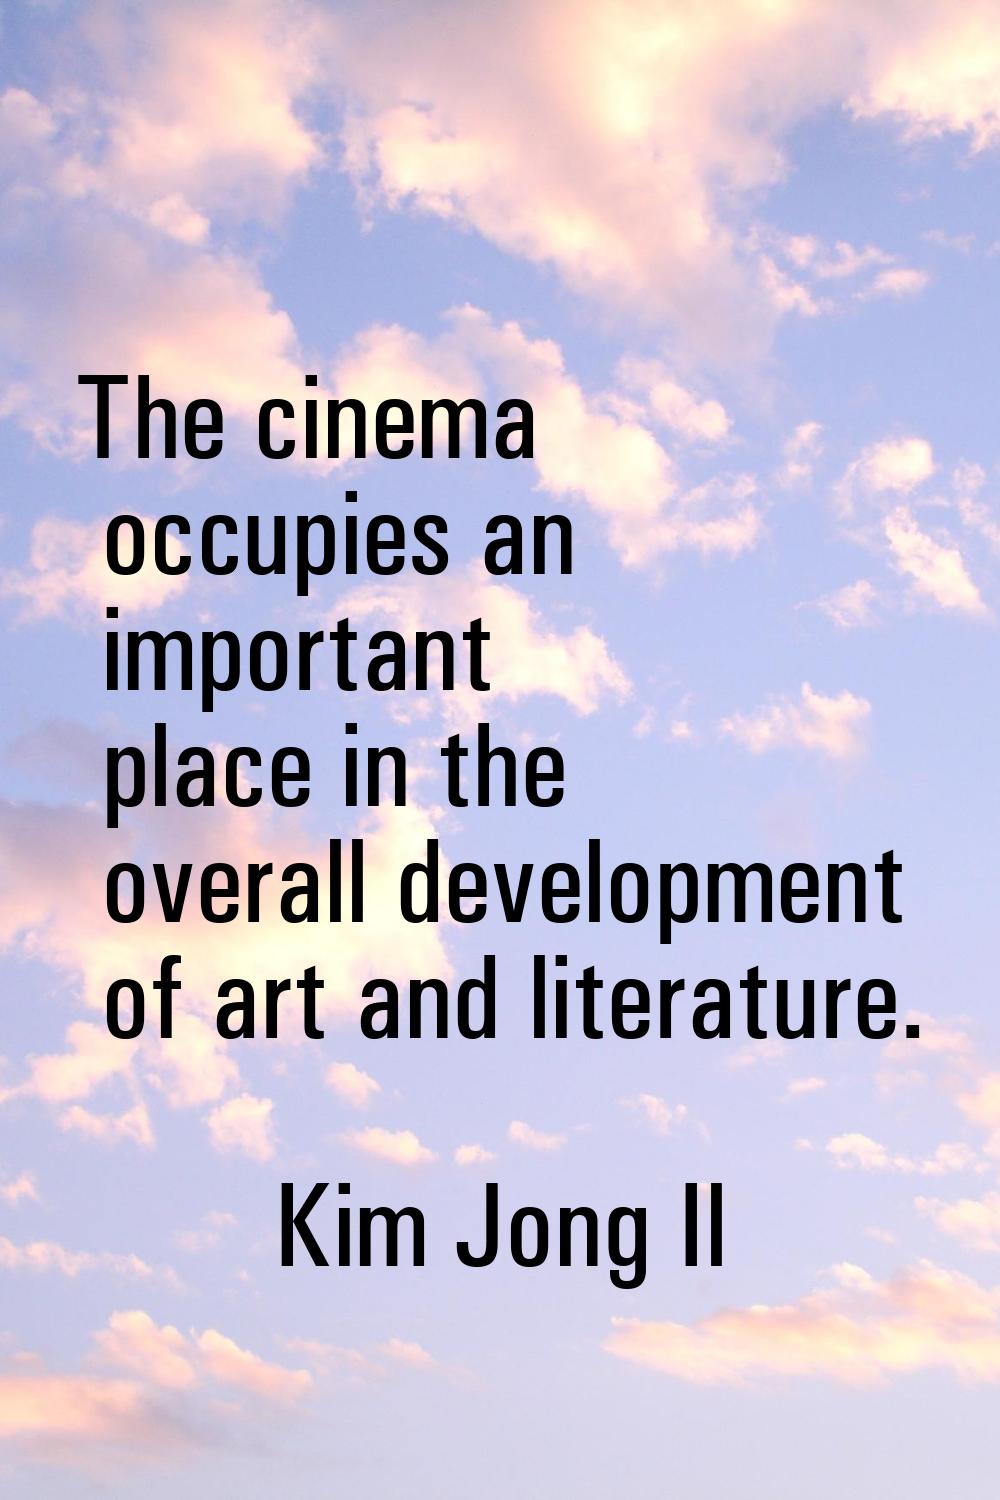 The cinema occupies an important place in the overall development of art and literature.